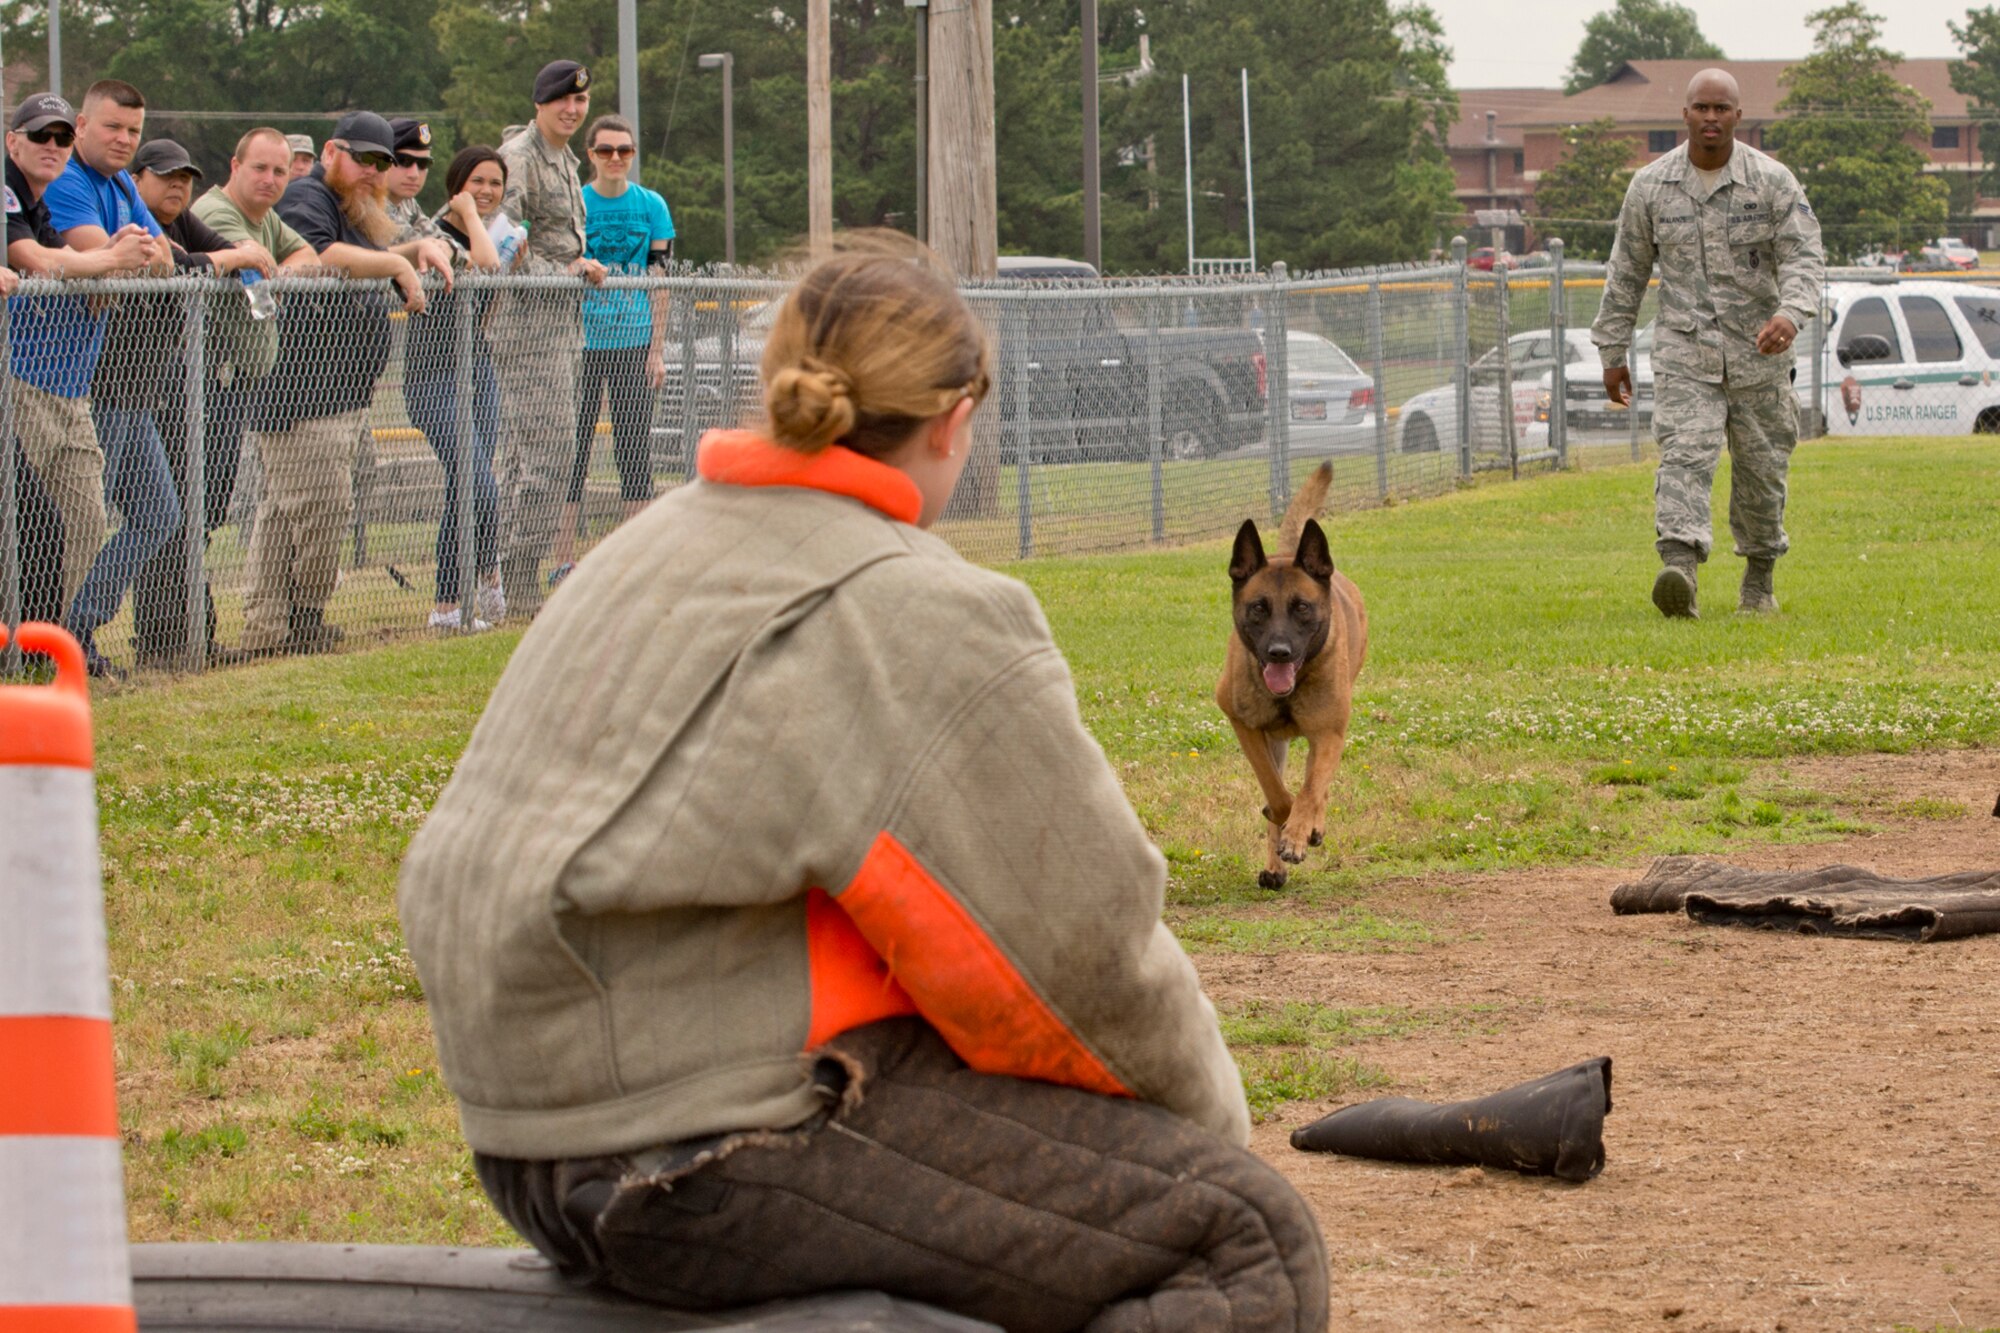 Freaki, a U.S. Air Force military working dog (MWD), maintains a lock on Senior Airman Ashley Evans, a 19th Security Forces Squadron patrolman, during the “Military Working Dog (MWD) Competition" at Little Rock Air Force Base, Ark., May 17, 2017. The competition, which included area law enforcement agencies, was held in honor of National Police Week, and was designed to conduct tactical obedience with multiple distractors to ensure the MWD would maintain keen focus on the decoy suspect sitting on the tire. The dogs had to bypass several bite sleeves and suits on the ground to reach the decoy. Freaki’s handler was Senior Airman Ndidi Akalanze, who is assigned to the 19th SFS. (U.S. Air Force photo by Master Sgt. Jeff Walston/Released)